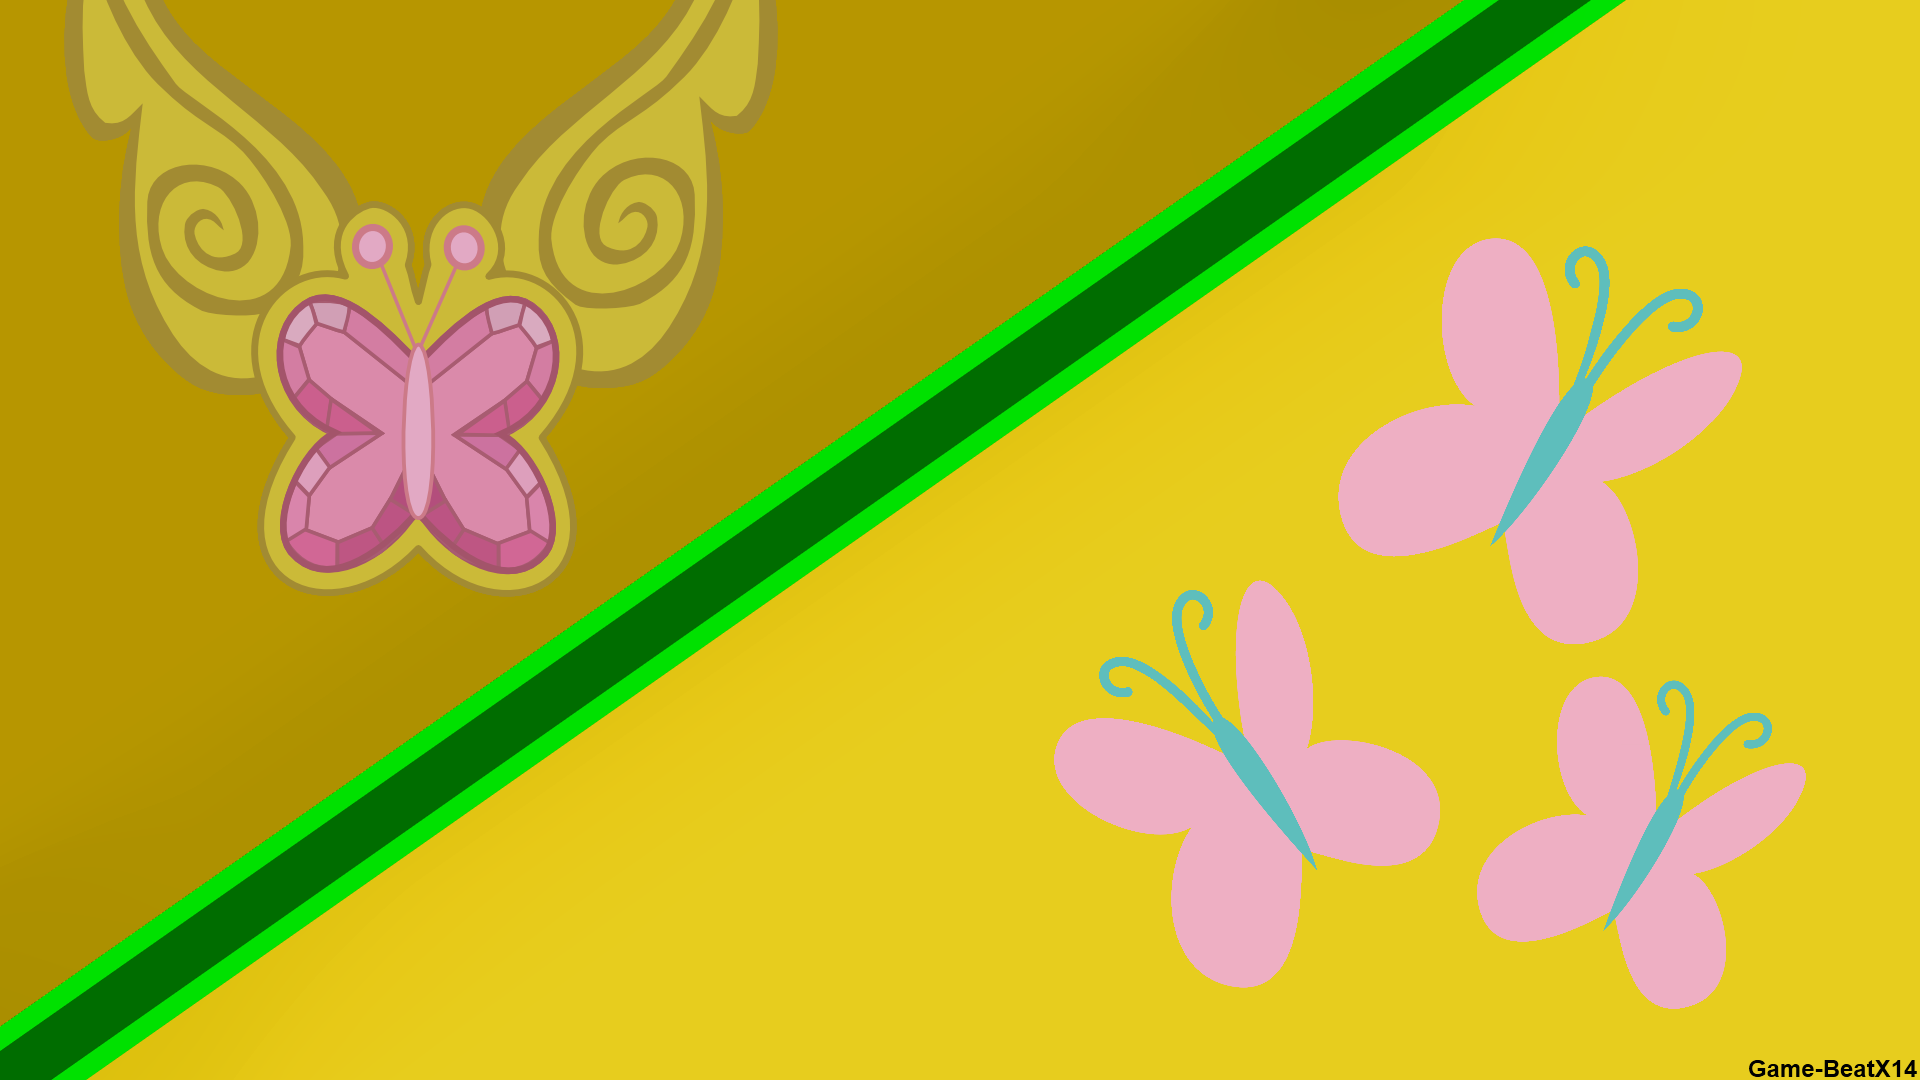 Fluttershy Kindness Wallpaper (Simple version) by BlackGryph0n, Game-BeatX14 and pageturner1988